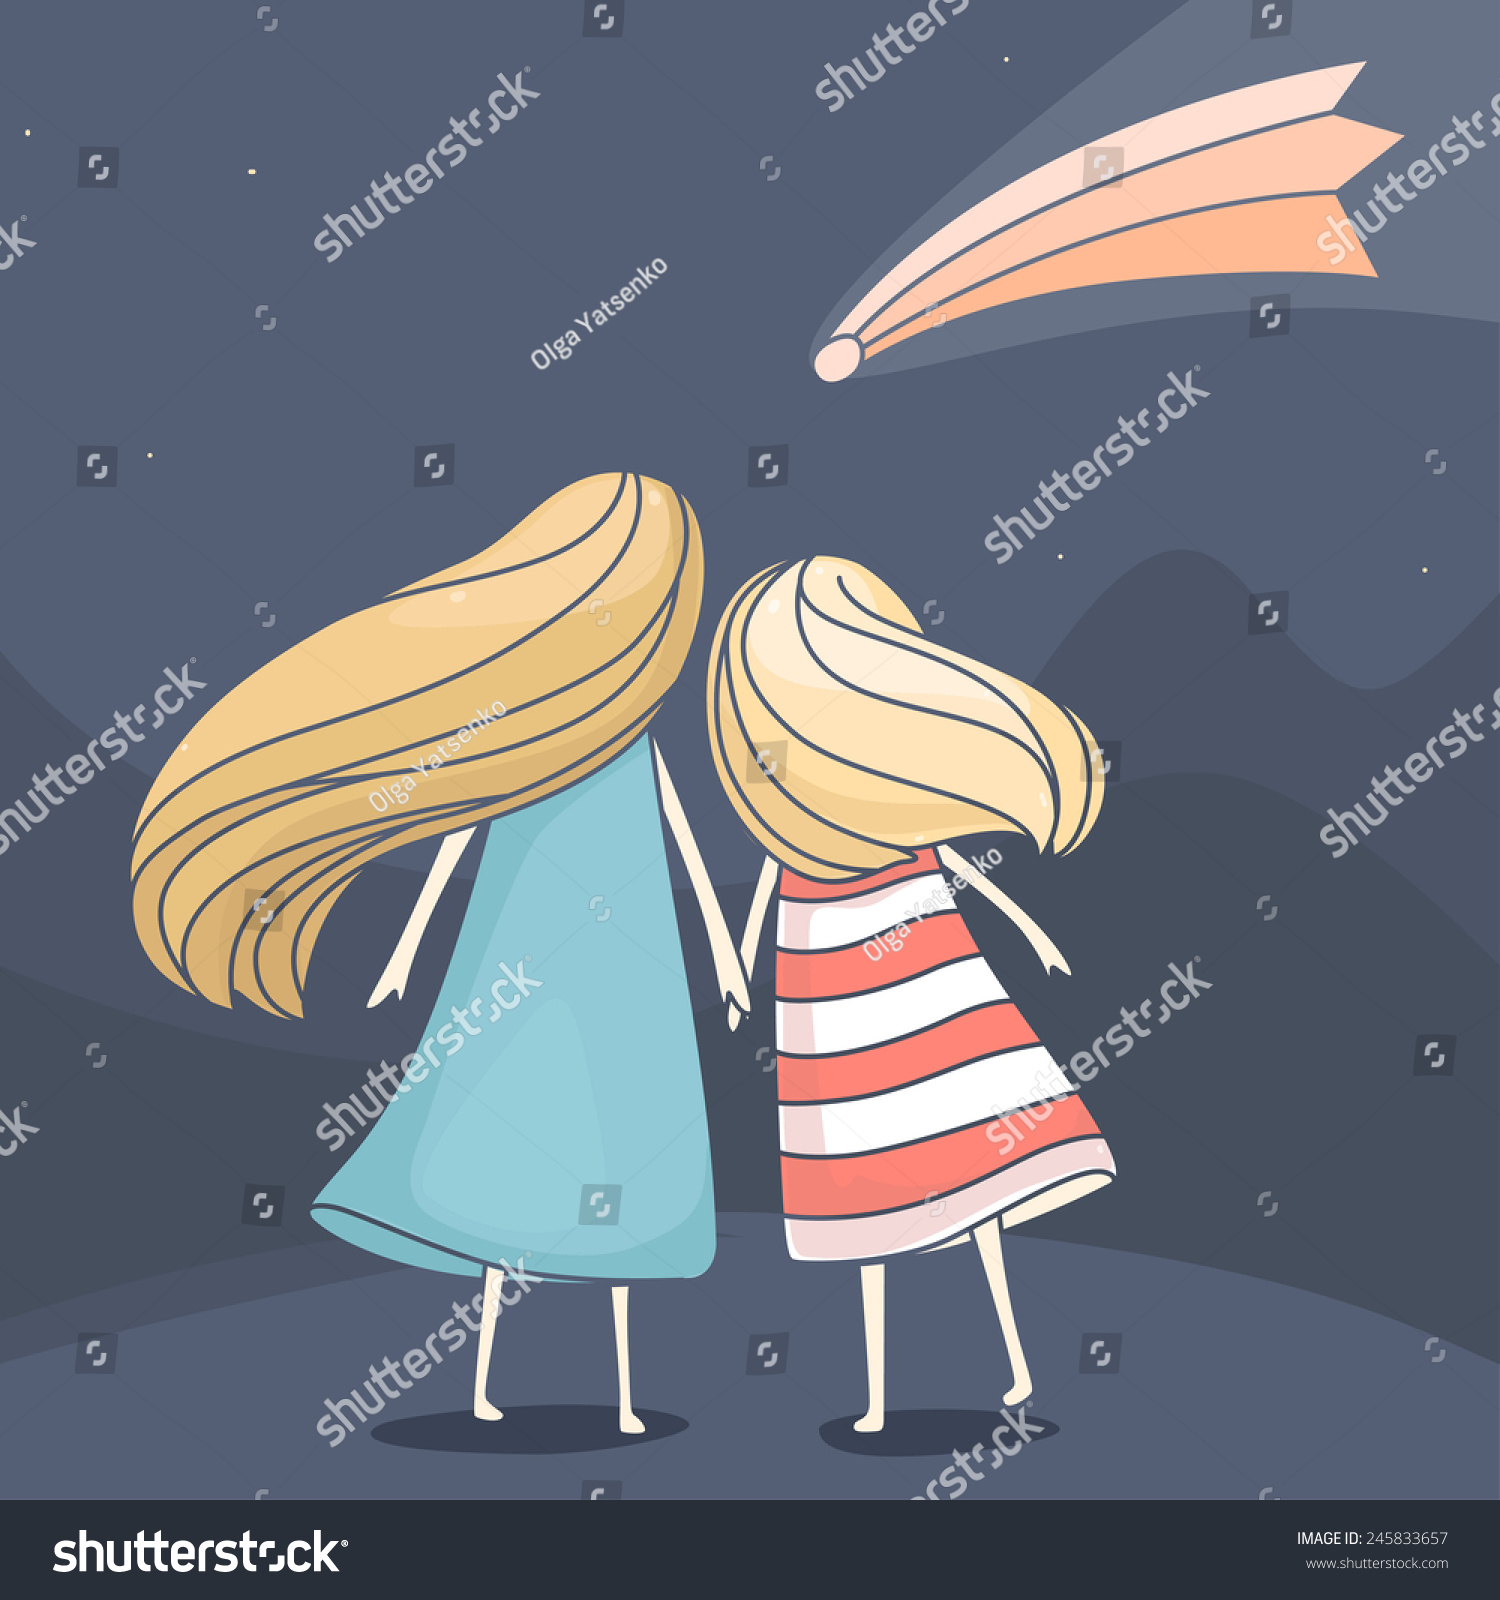 Two Girl Friends Looking At A Falling Comet In The Sky At Night. Vector ...